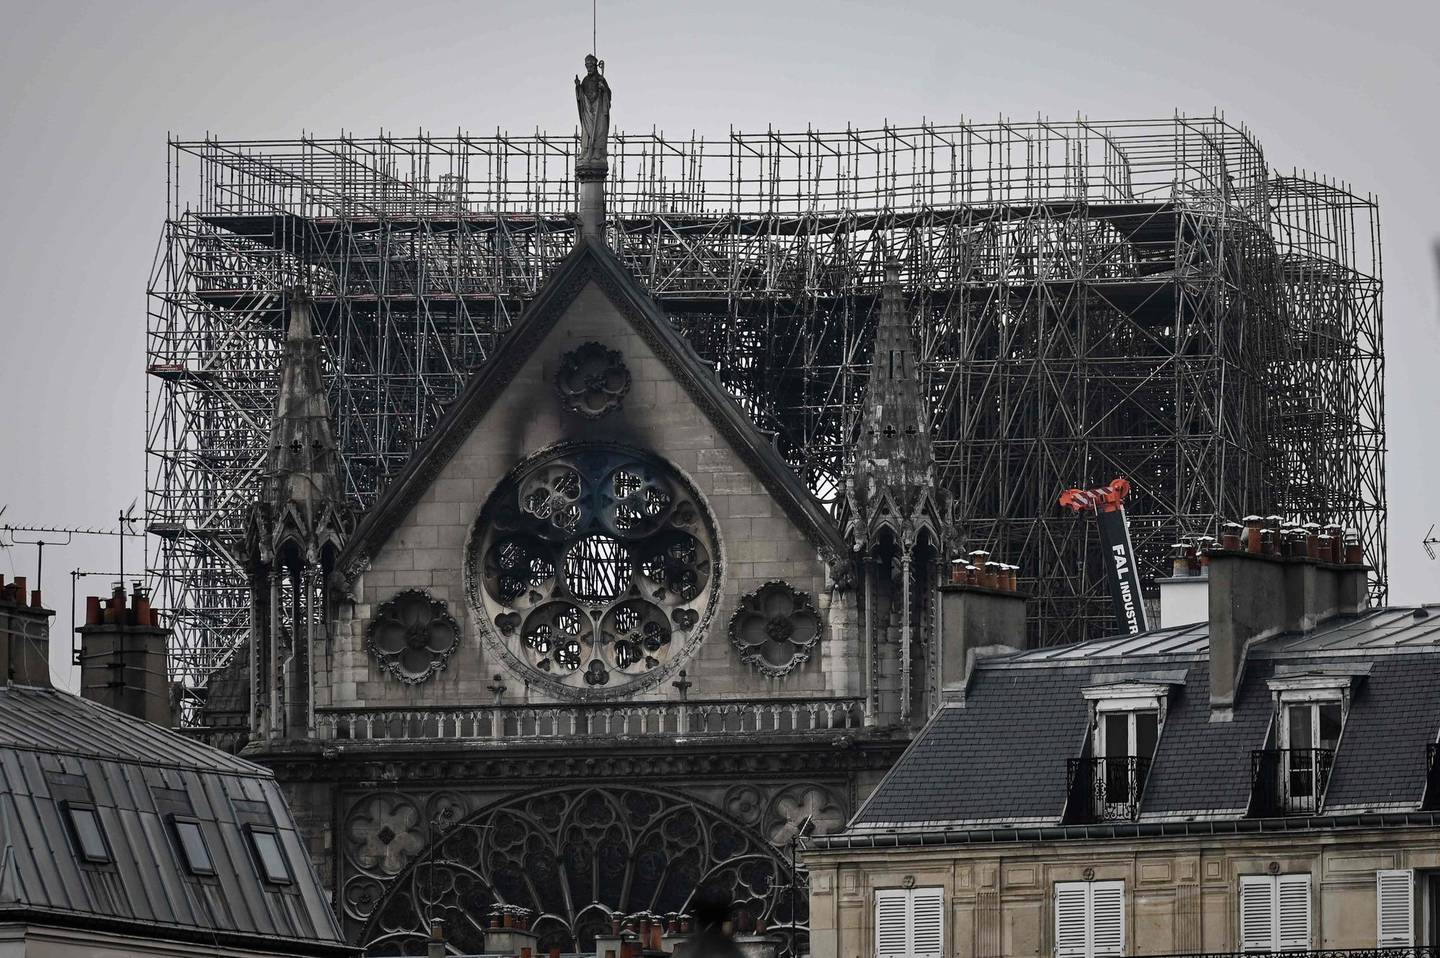 Scafolding which was errected for the renovation of the landmark Notre-Dame Cathedral, remains in place a day after a devastating fire destroyed the roof and other areas of the Gothic cathedral in central Paris on April 16, 2019. - A major fire broke out at the landmark Notre-Dame Cathedral in central Paris sending flames and huge clouds of grey smoke billowing into the sky on April 15, 2019 evening. French investigators probing the devastating blaze at Notre-Dame Cathedral questioned workers who were renovating the monument on April 16, 2019, as hundreds of millions of euros were pledged to restore the historic masterpiece. (Photo by Philippe LOPEZ / AFP)